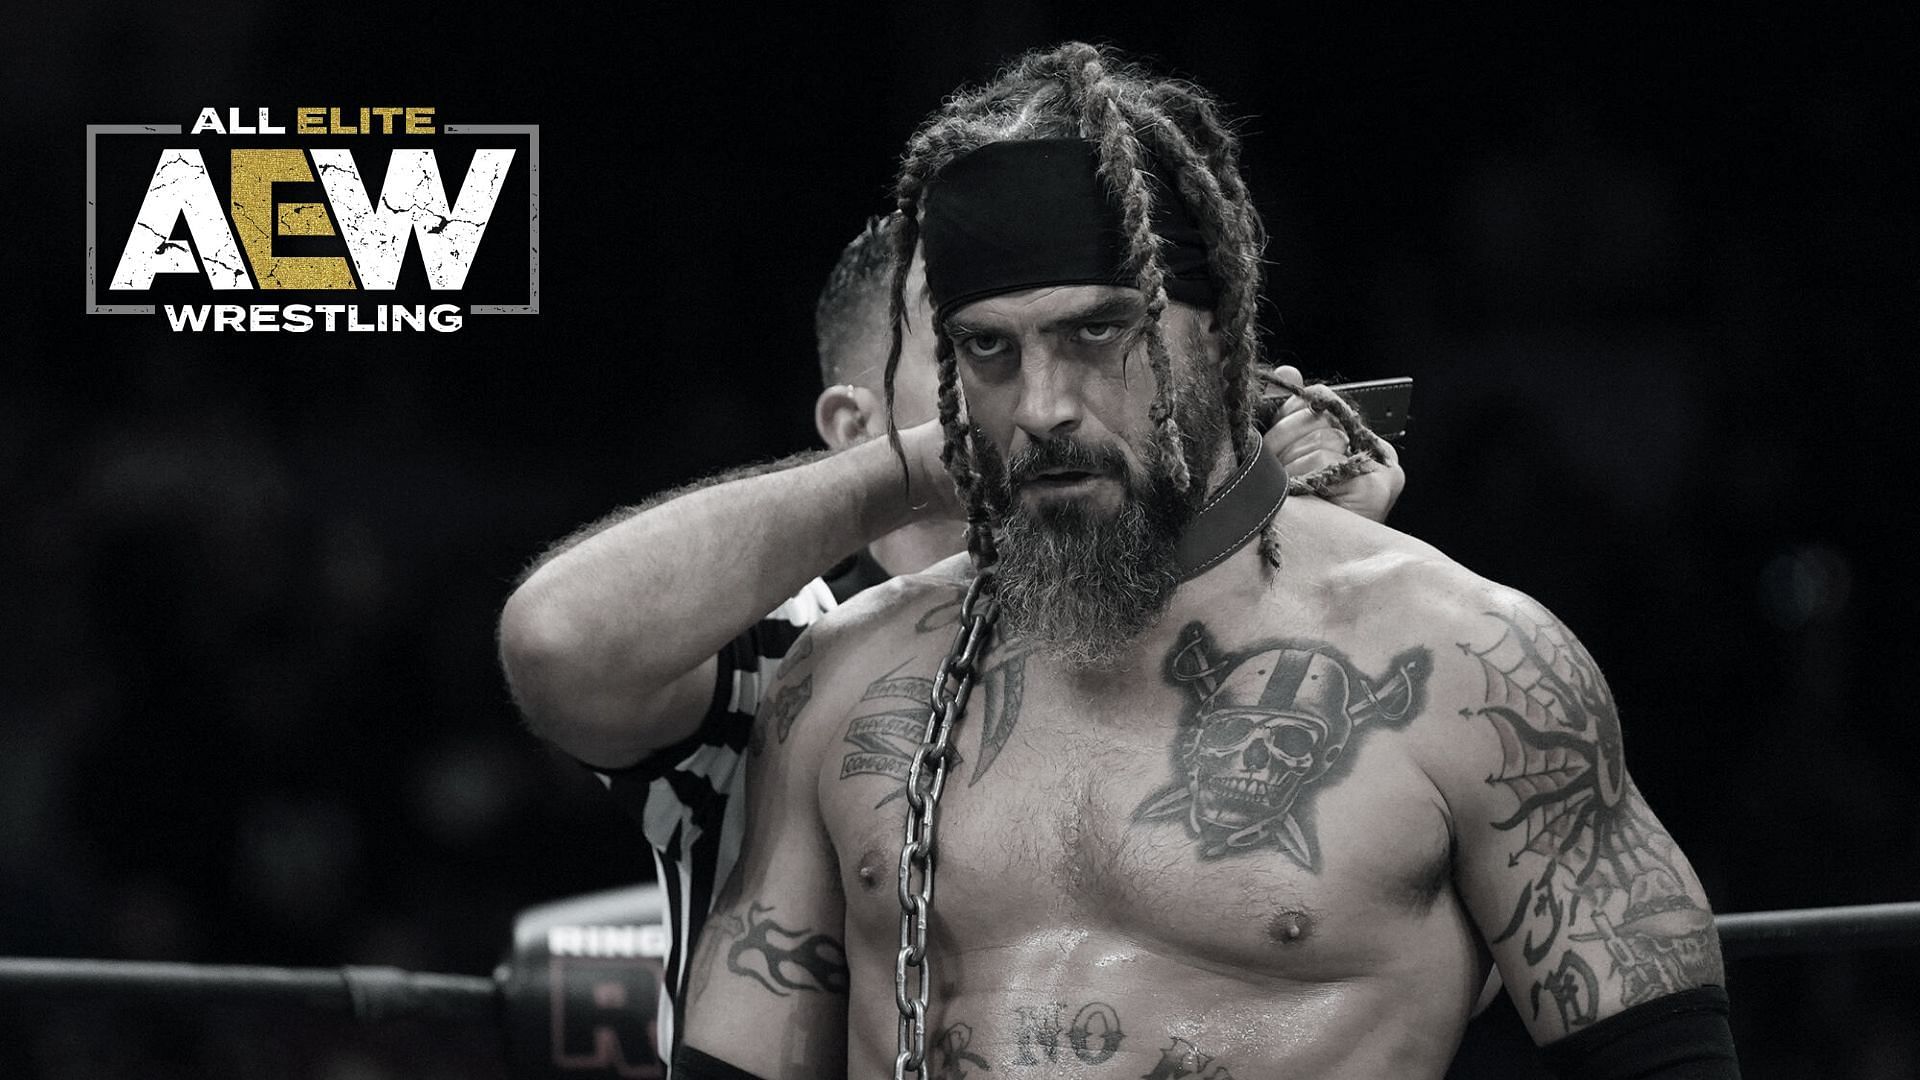 ROH legend Jay Briscoe recently passed away